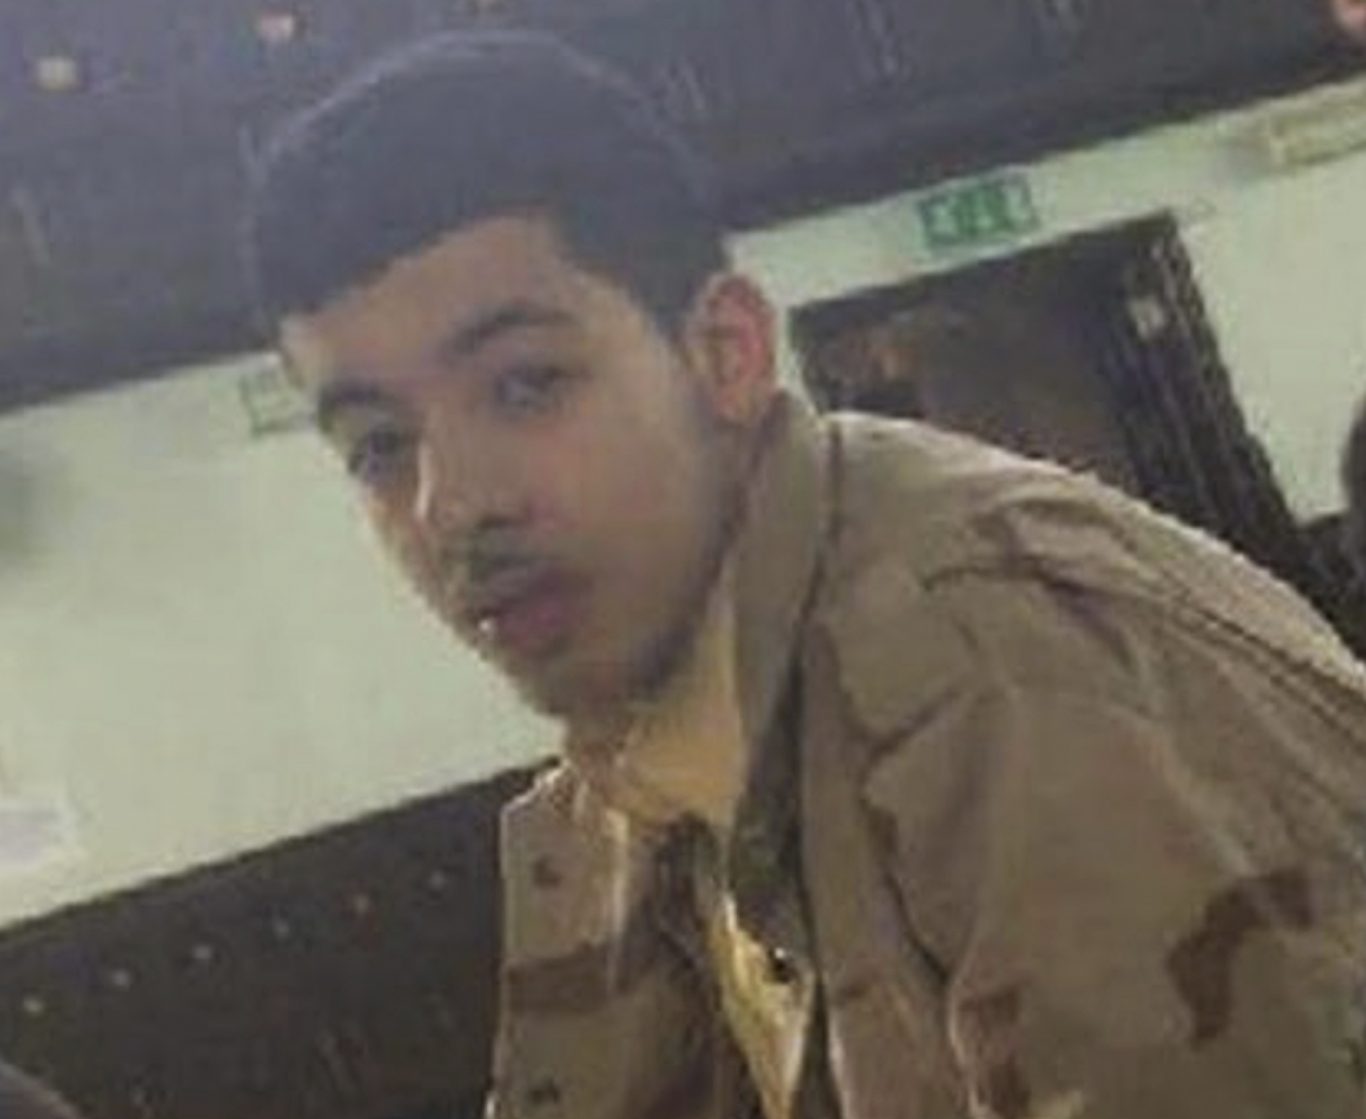 Salman Abedi's father has denied that his son is linked the suicide bombing that killed 22 people (AP)